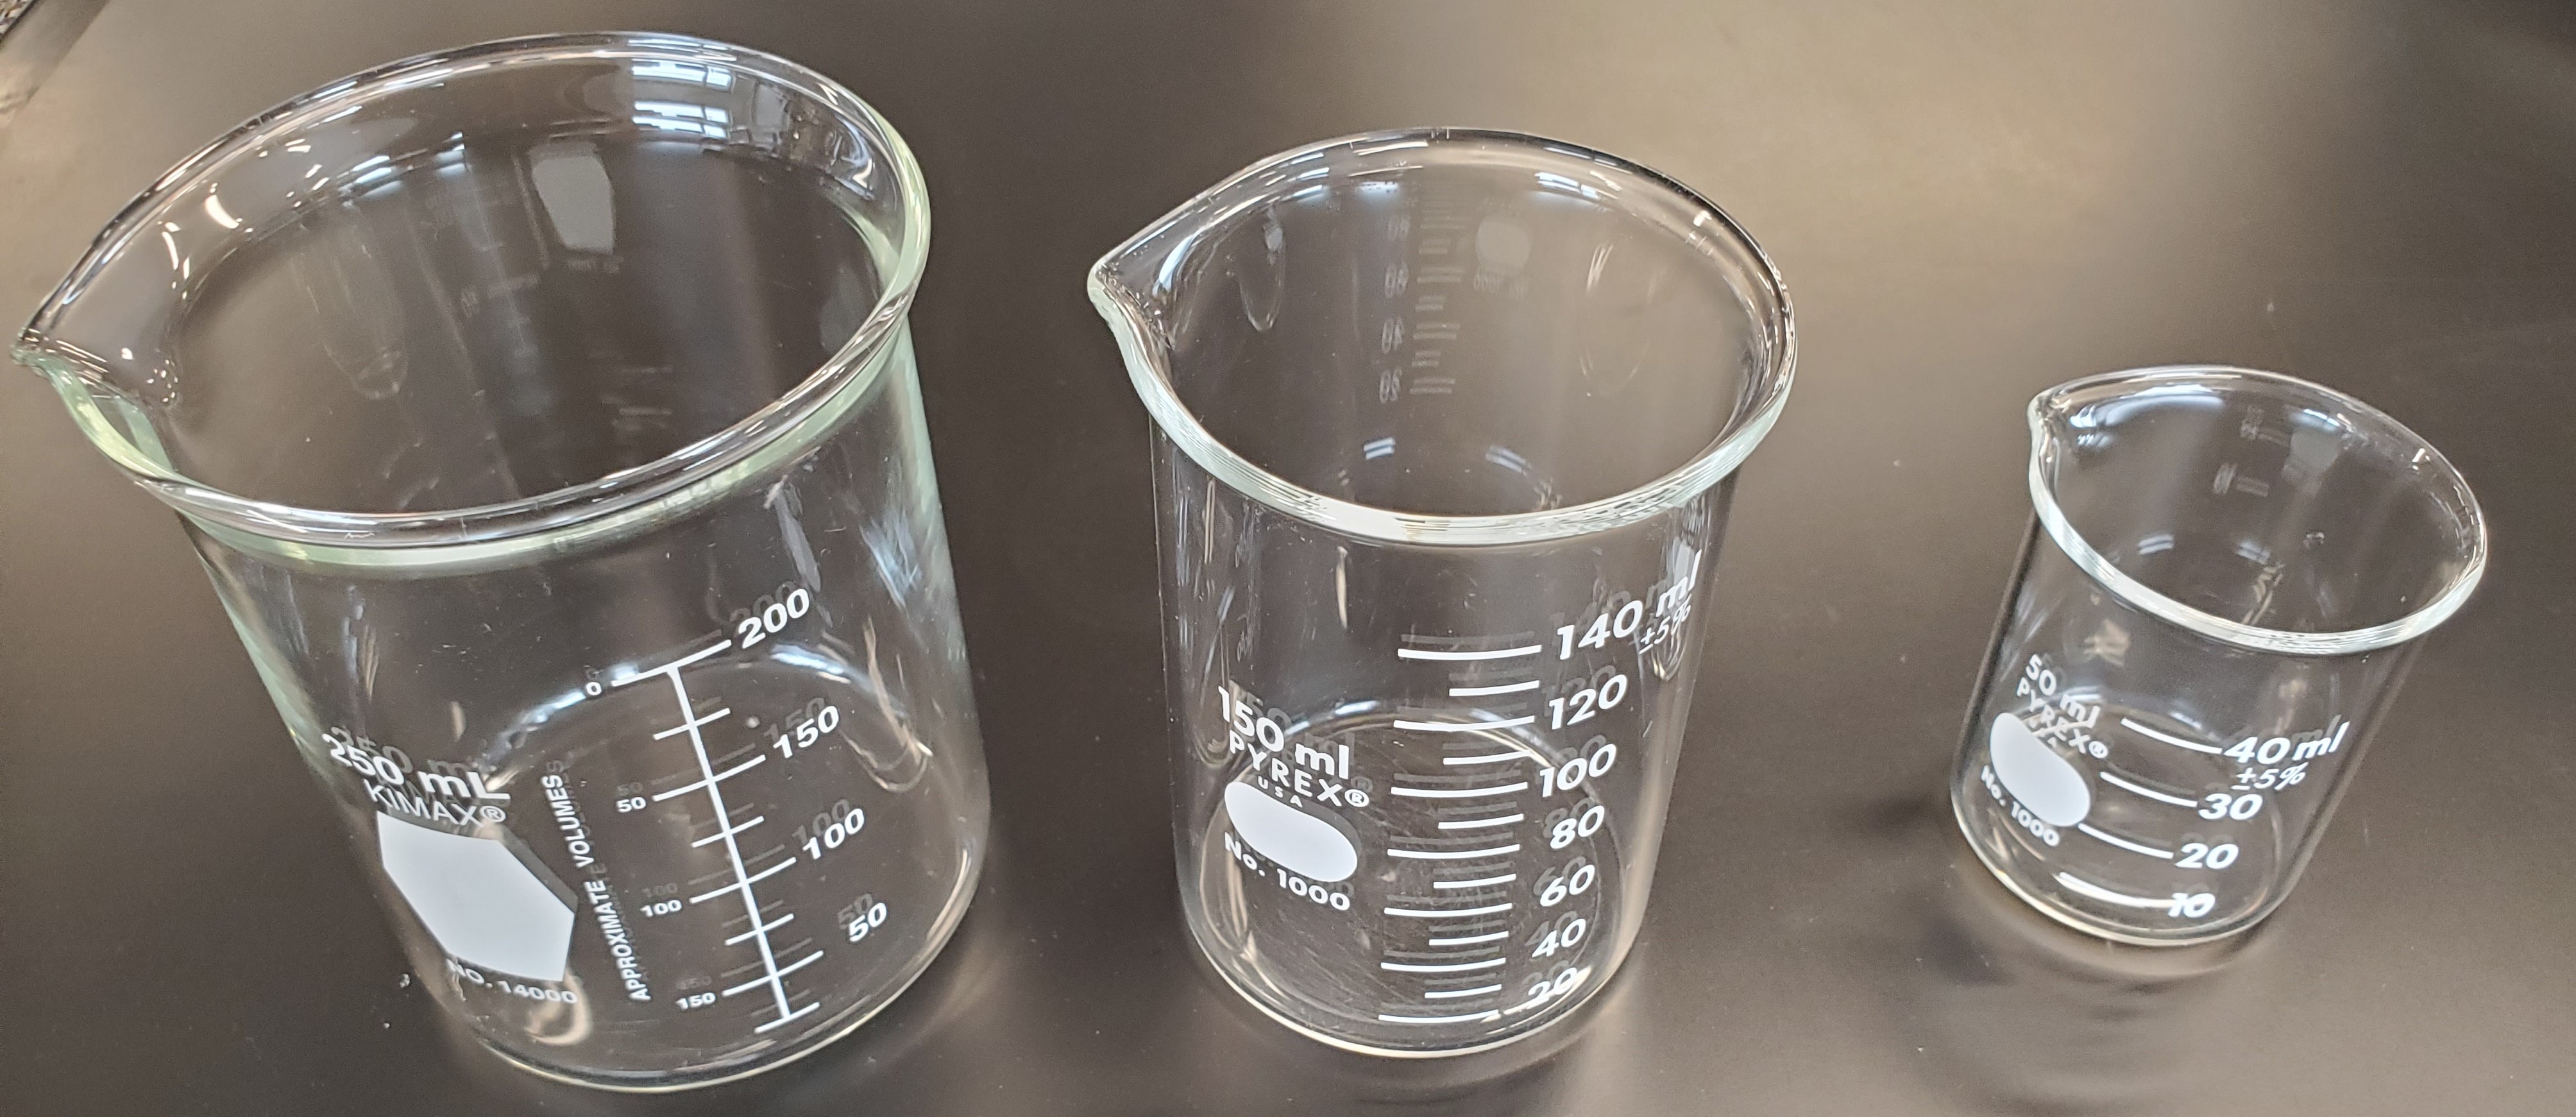 Picture of glass beakers